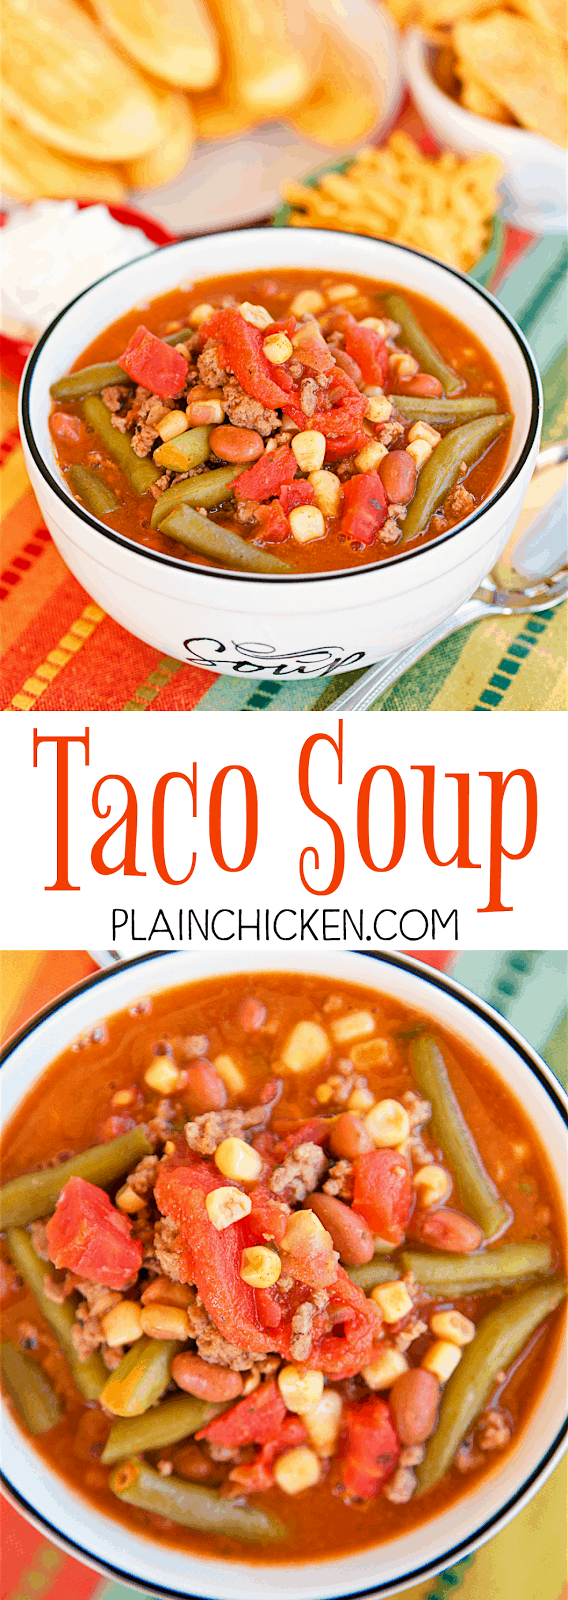 Taco Soup - ready in under 30 minutes! Love this version with green beans and BEER! Hamburger, pinto beans, green beans, ranch beans, stewed tomatoes, beer, diced tomatoes and green chiles, taco seasoning and Ranch dressing mix. We make this at least twice a month. SO good!! Can freeze leftovers for a quick meal later. You can also make this in the slow cooker. 